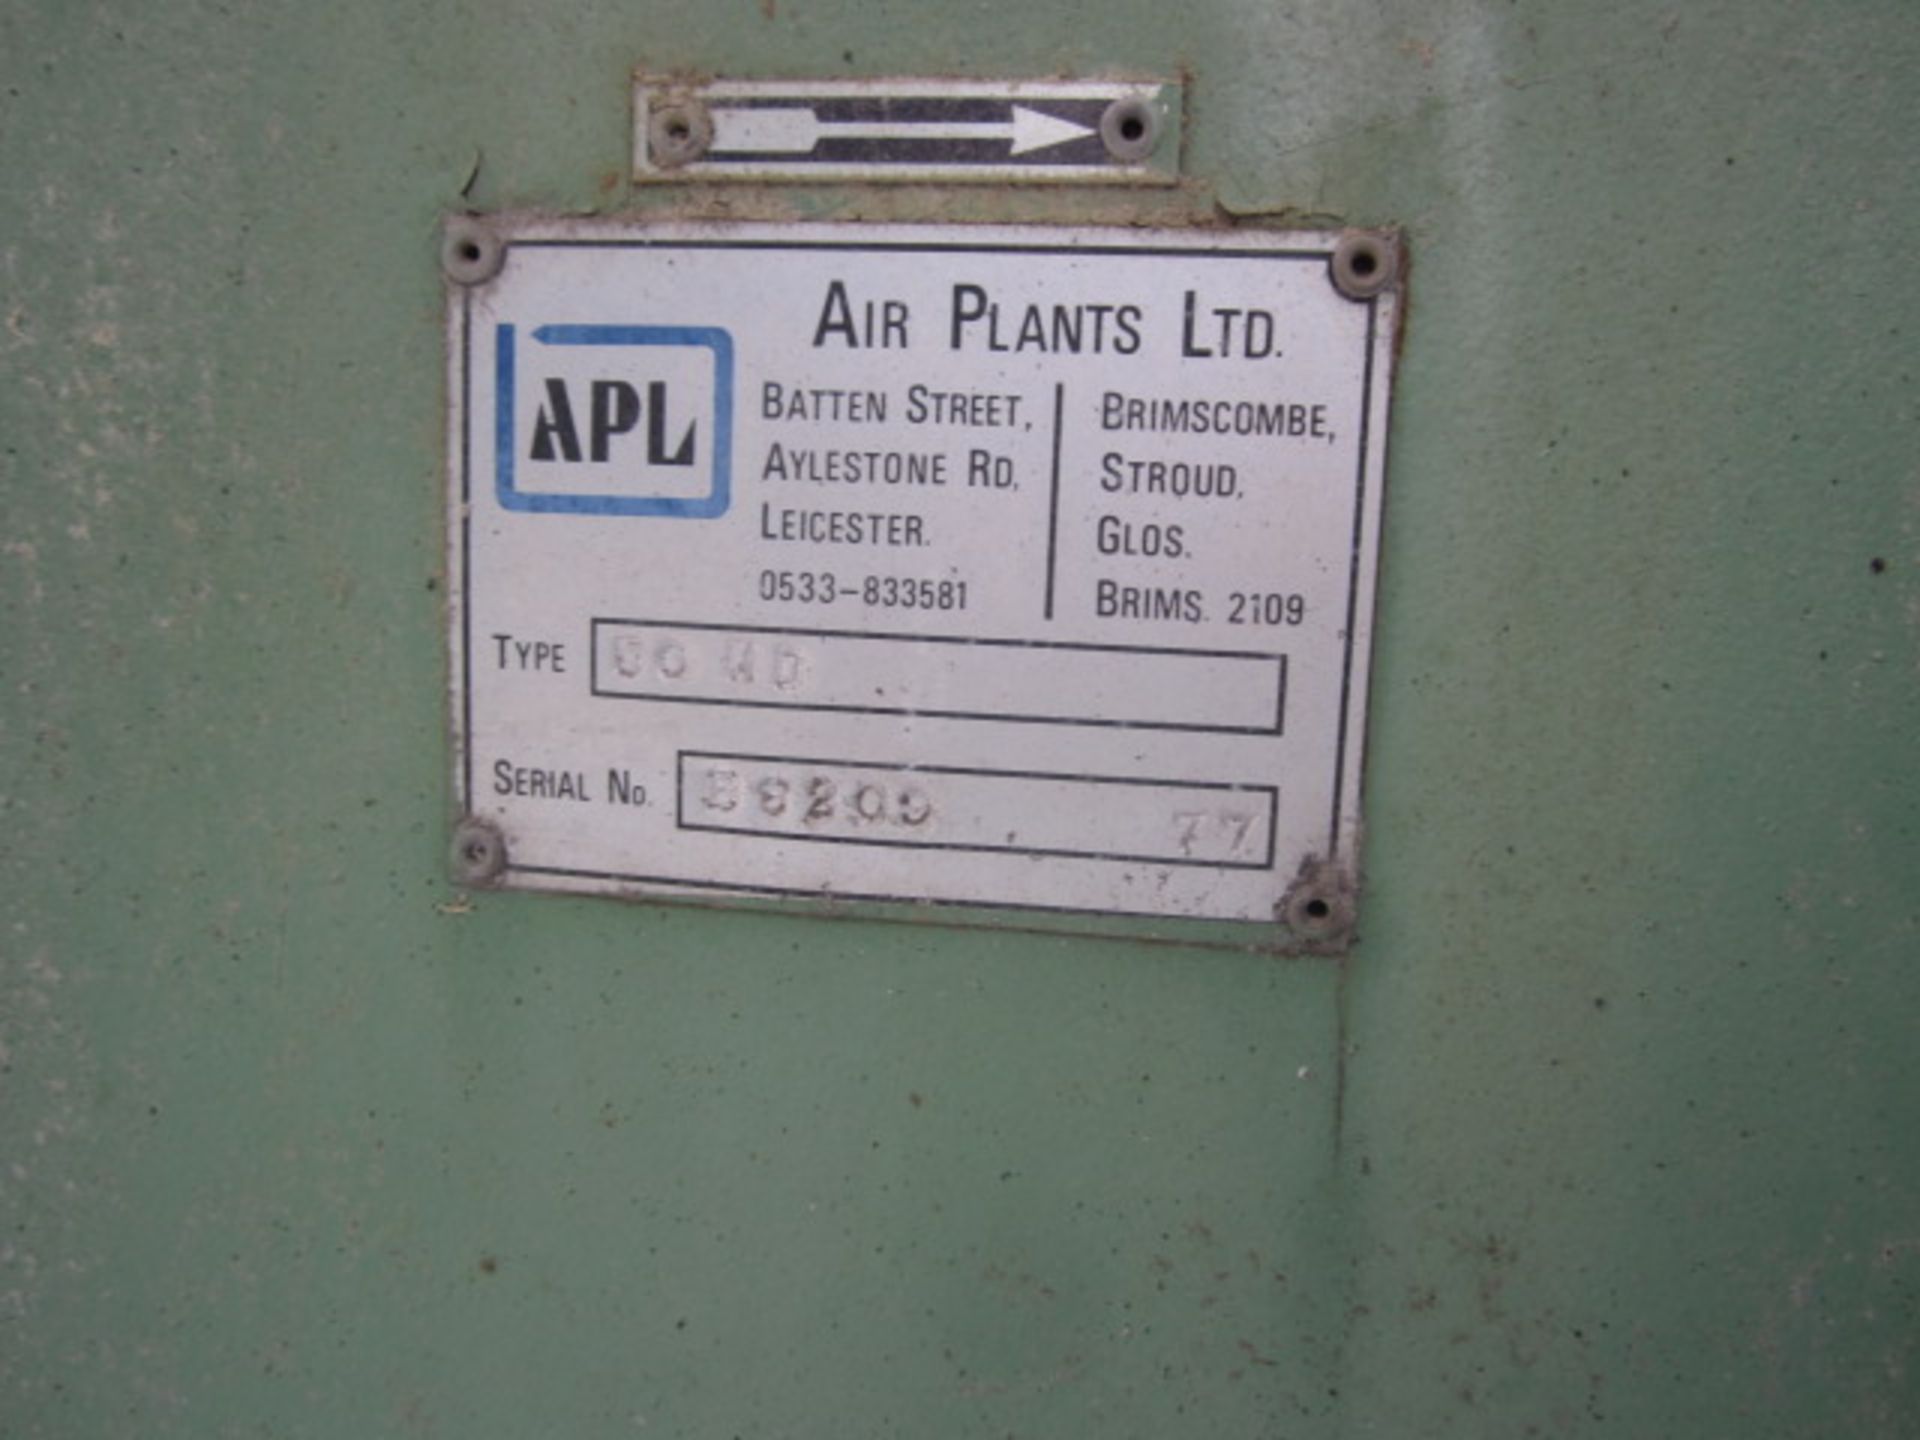 Airplants galvanised steel, heavy duty dust extraction unit, with 8 bag outlet , APL 50MD extraction - Image 8 of 8